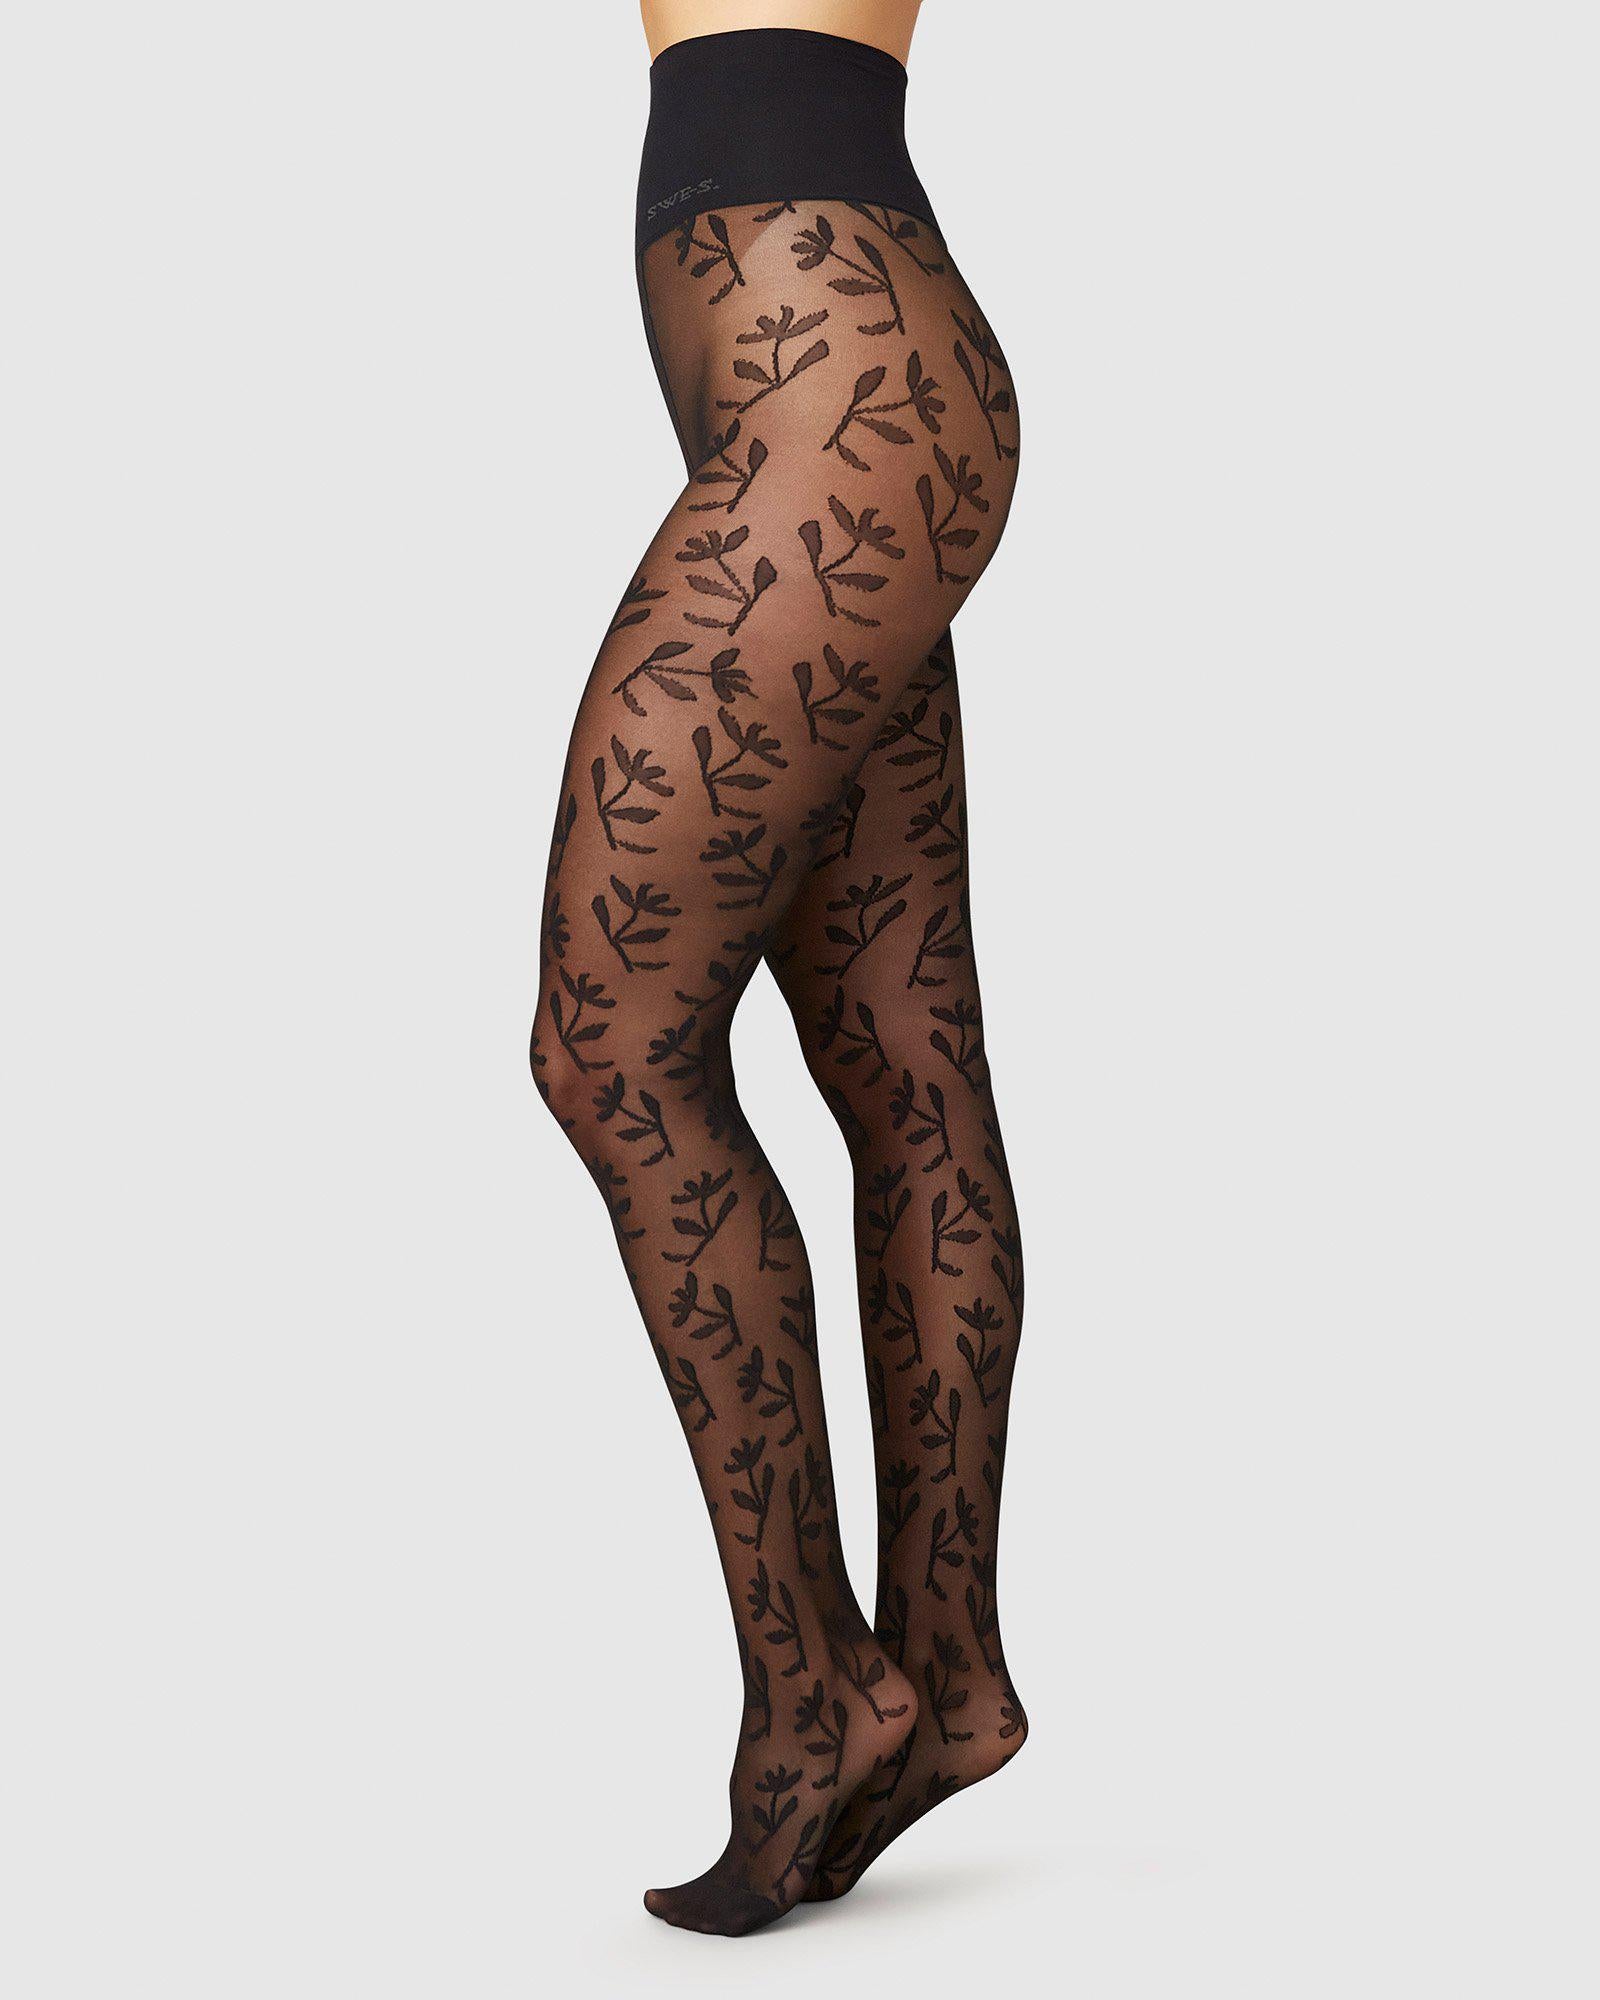 Lace Stockings, Black Floral Lace Tights 